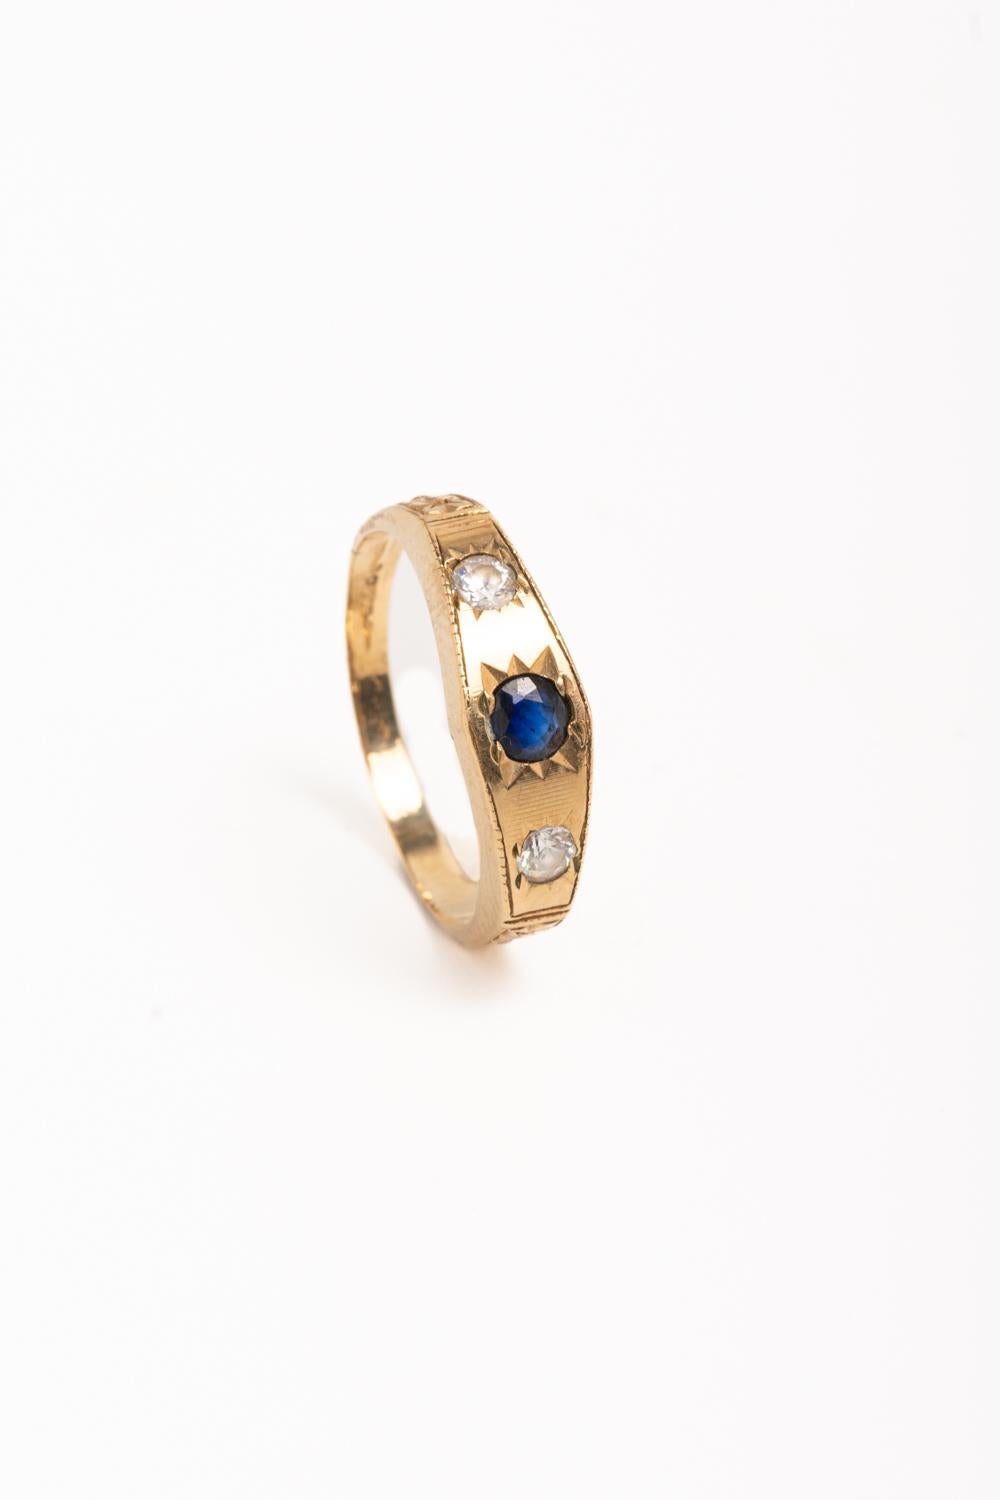 Vintage 9ct Gold Diamond and Sapphire Ring In Good Condition For Sale In Portland, GB